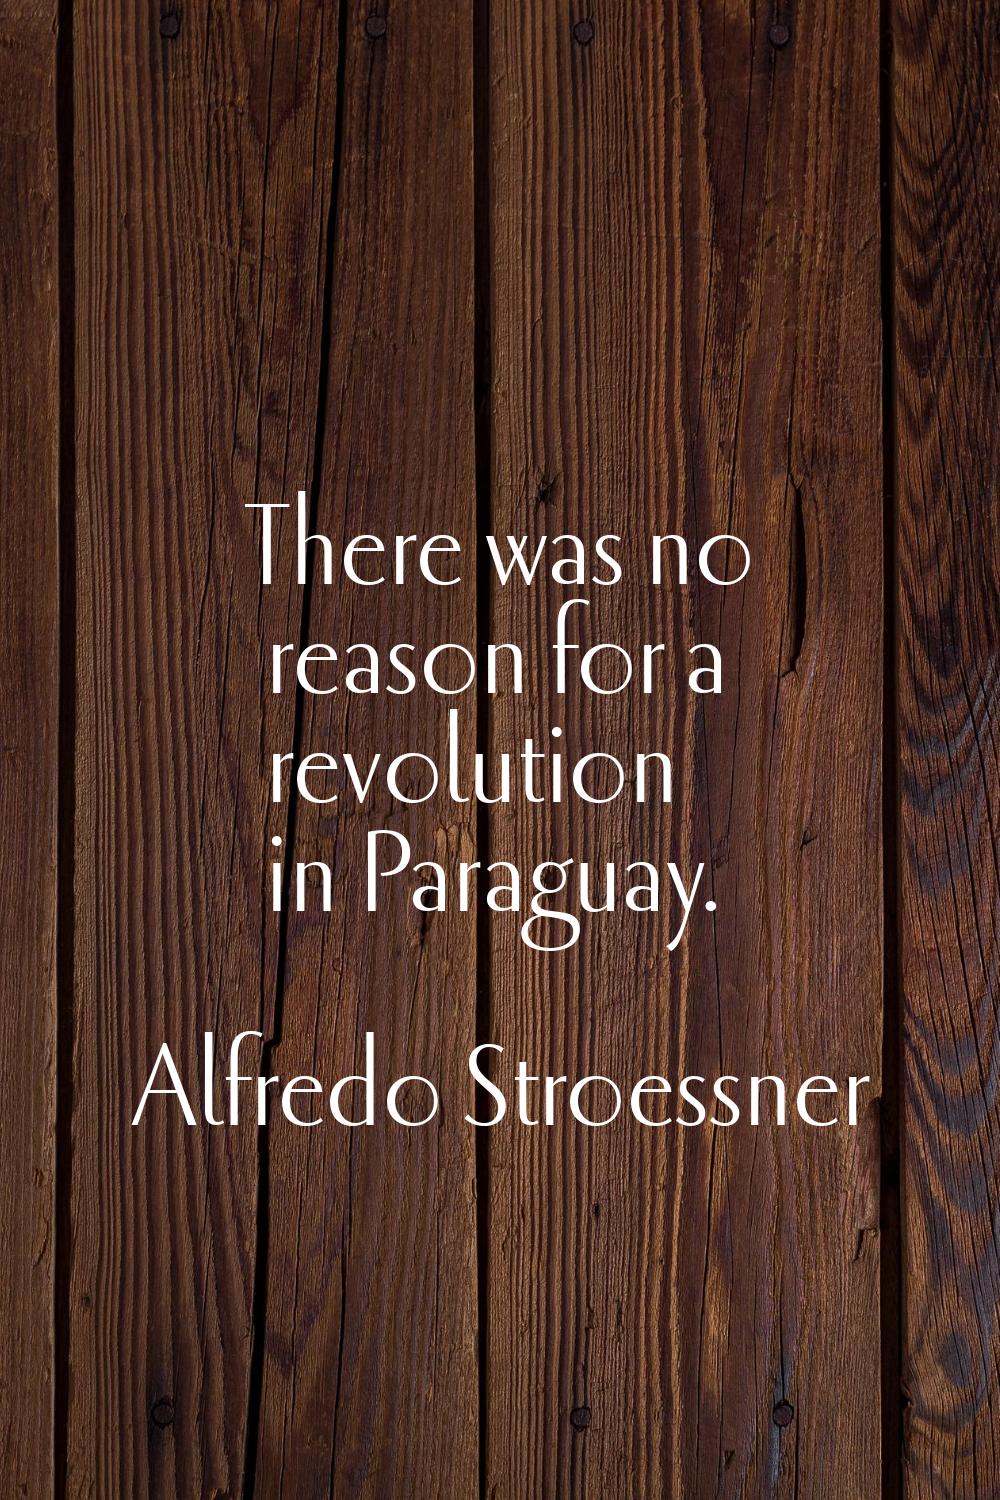 There was no reason for a revolution in Paraguay.